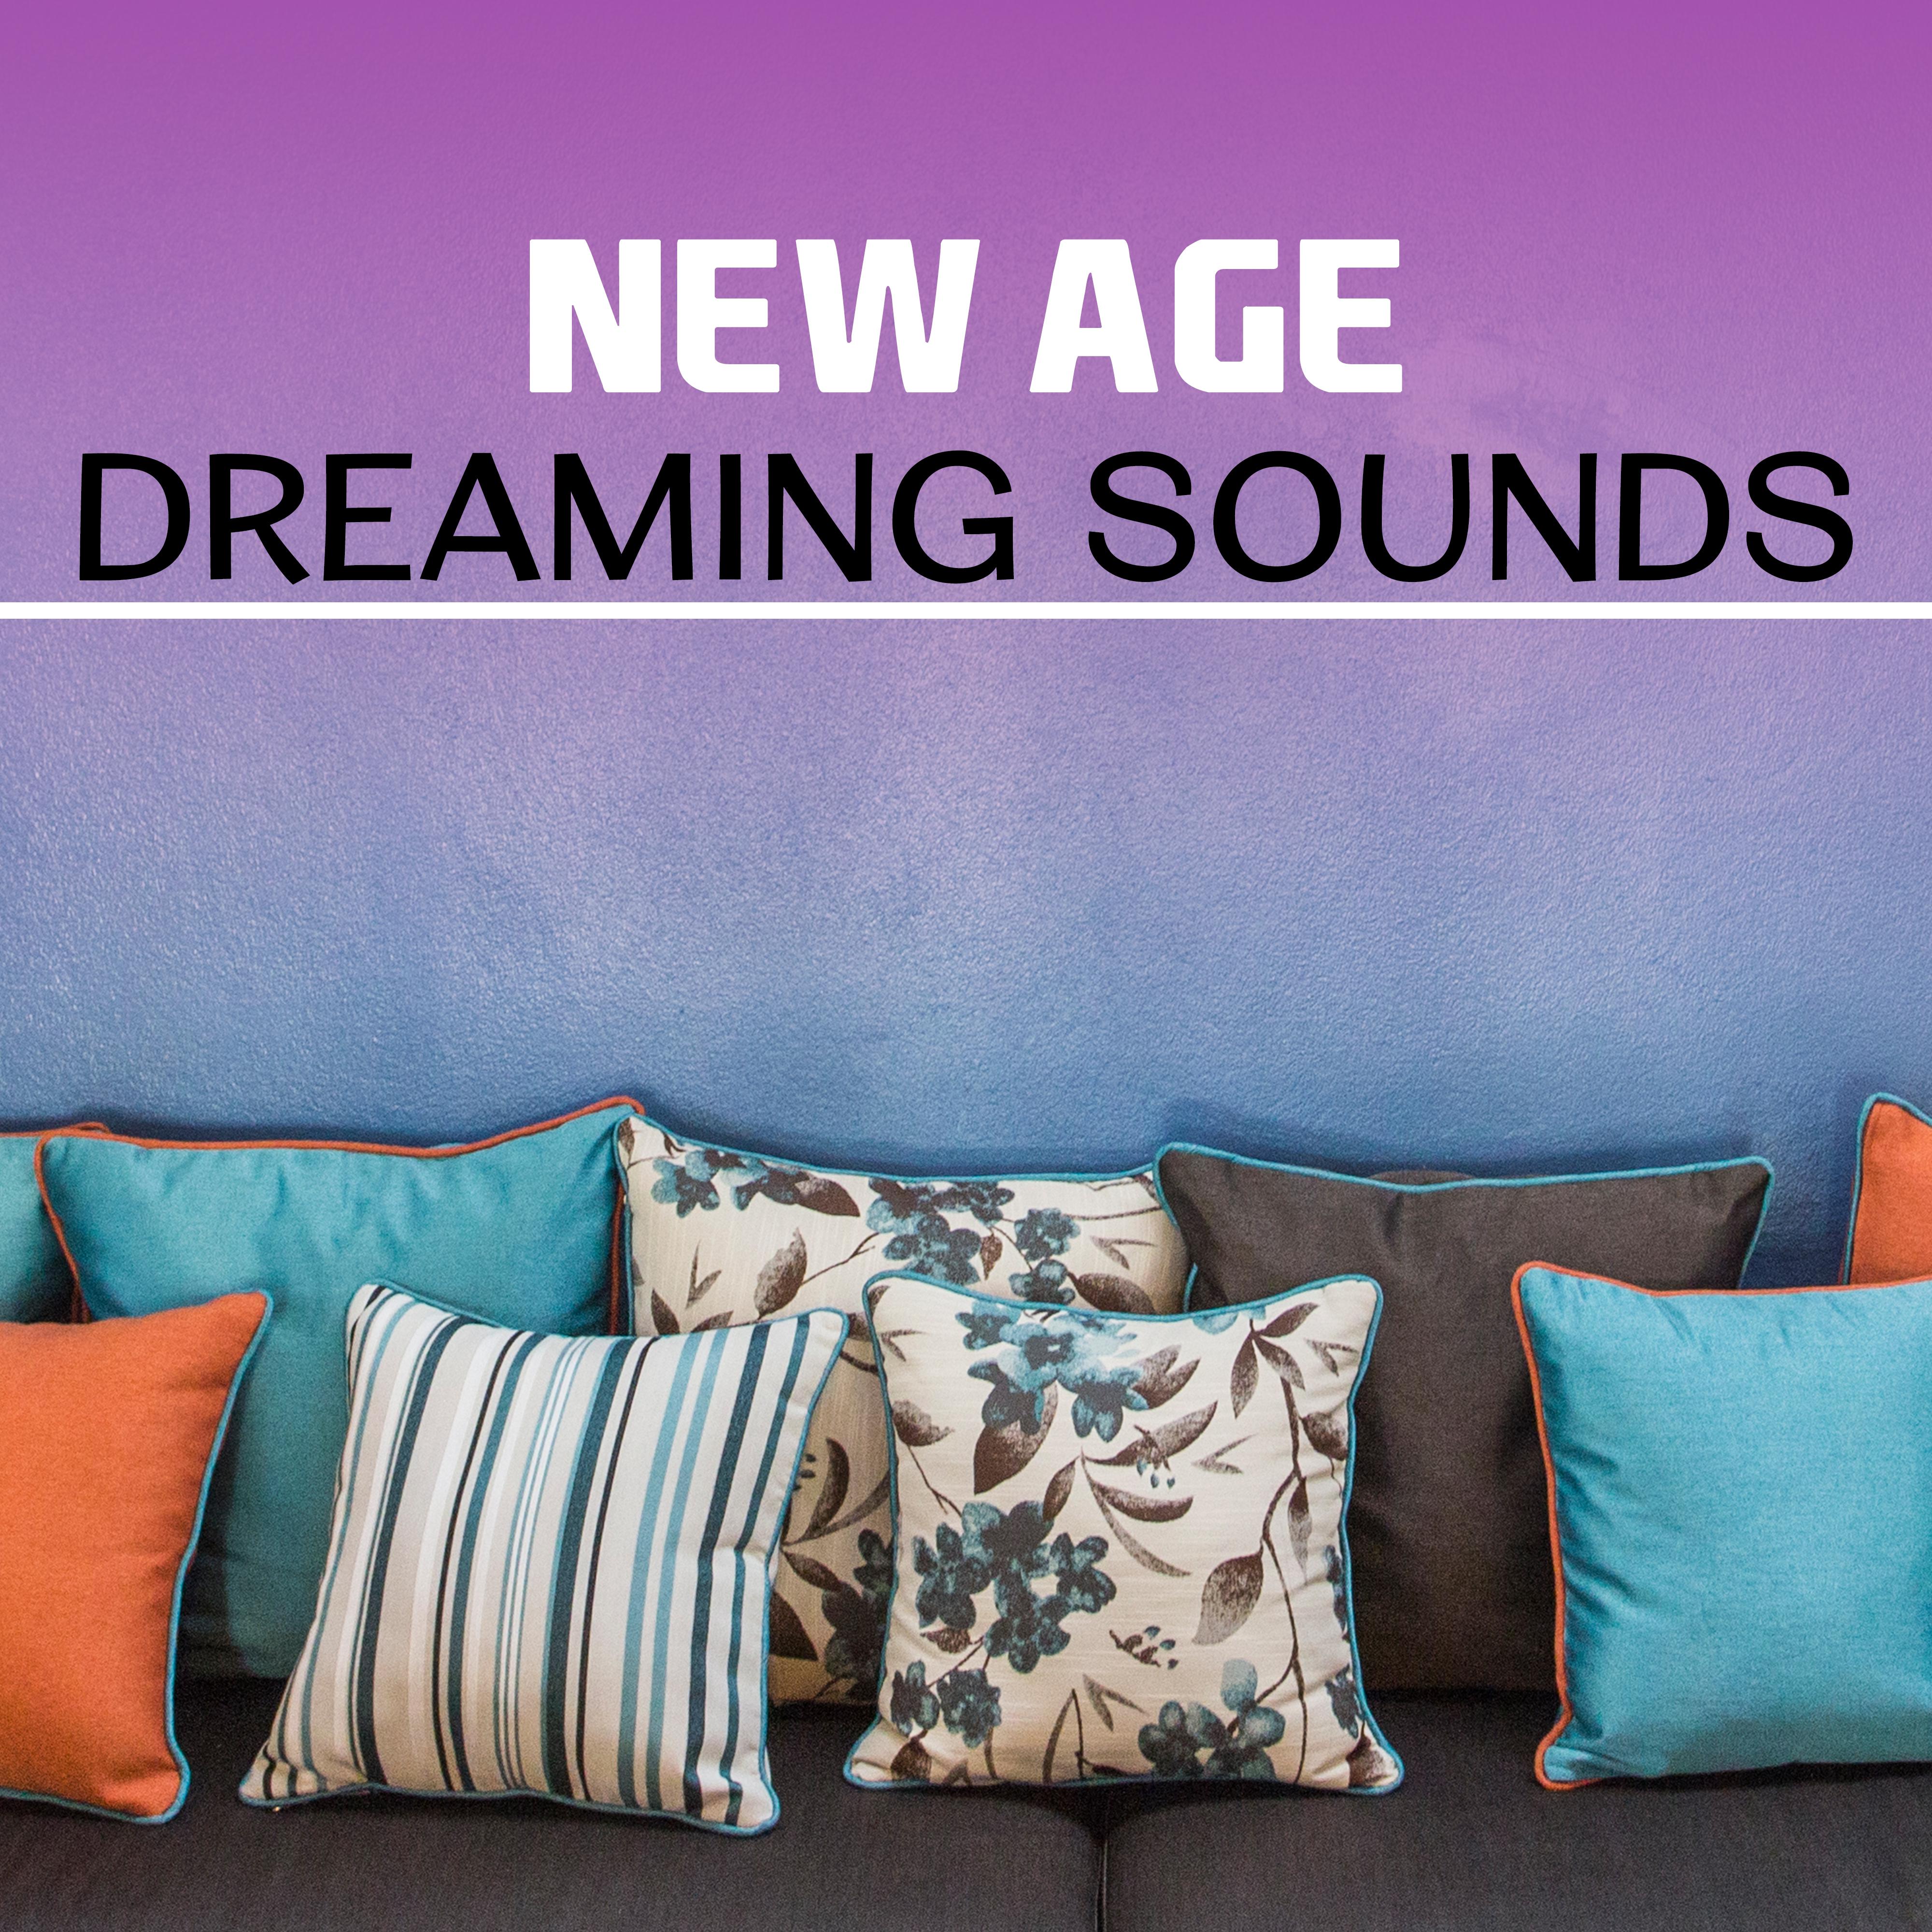 New Age Dreaming Sounds  Calming Waves, Stress Relief, Peaceful Music, Chilled Sounds, Night Rest